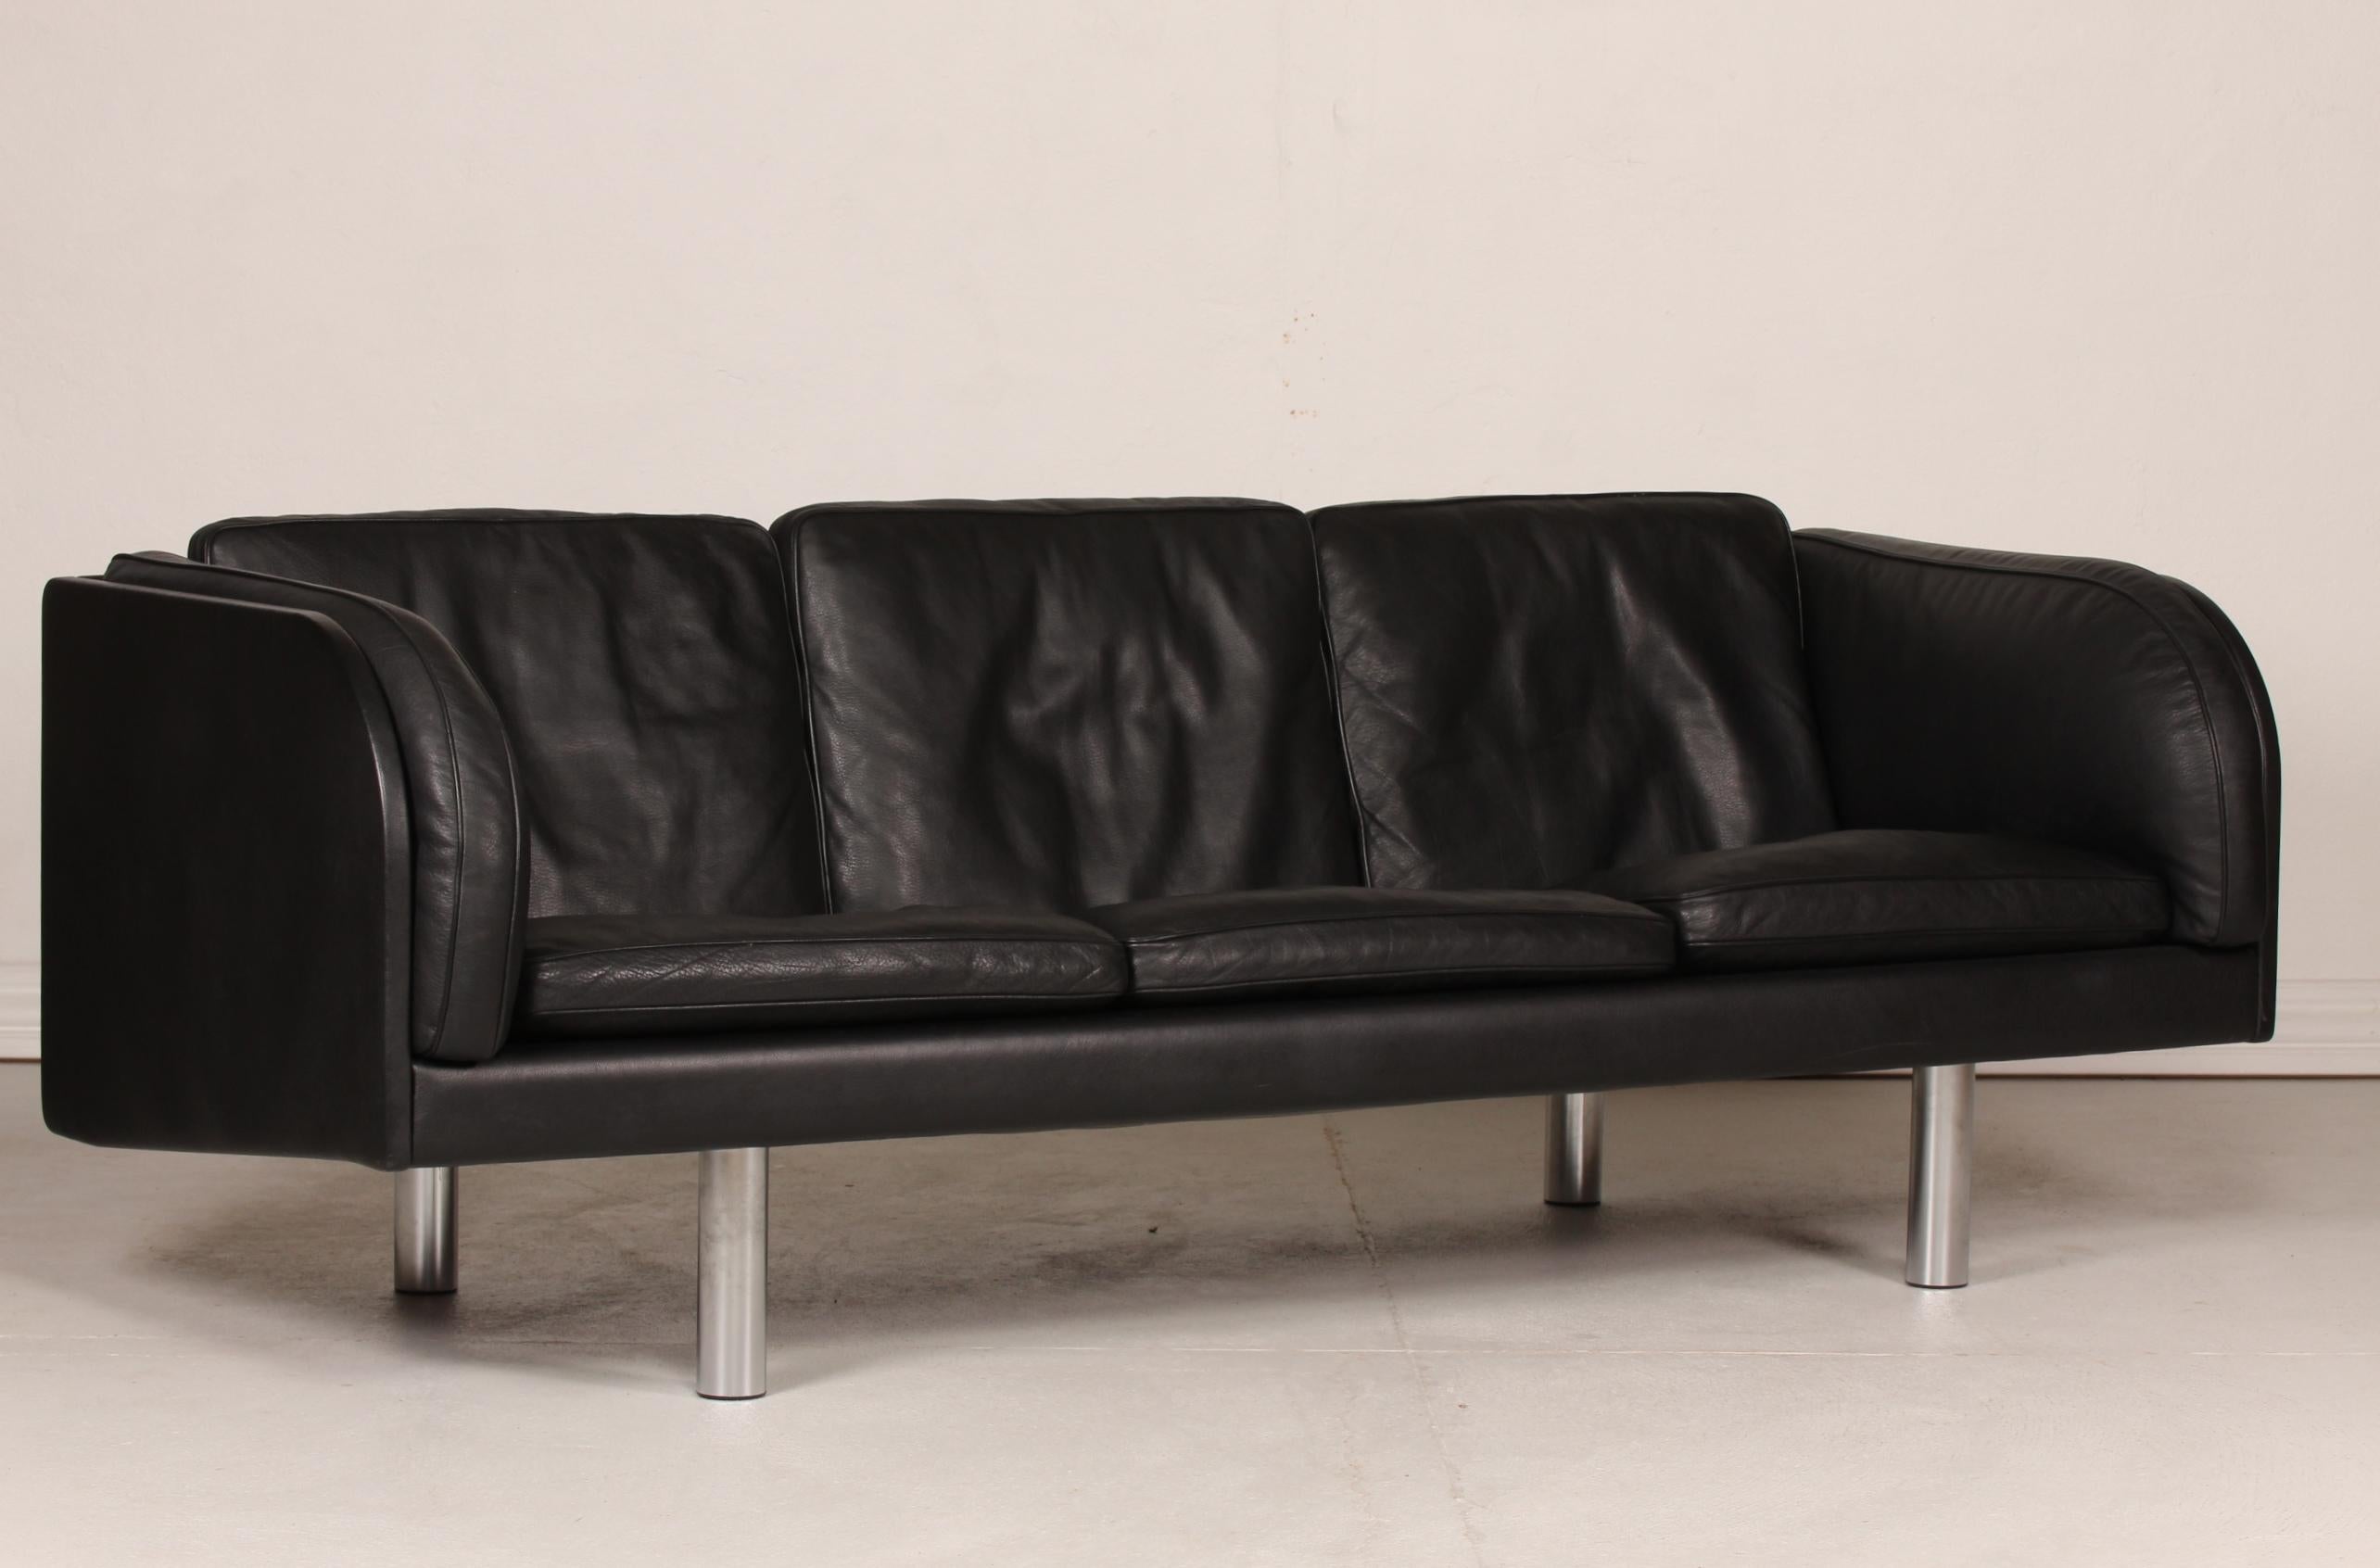 Danish vintage Jørgen Gammelgaard (1938-1991) sofa for 3 persons model EJ 20/3 manufactured by Erik Jørgensens Møbelfabrik.
It's upholstered with the original black leather in very delicate aniline quality and the legs are made of metal.

Very